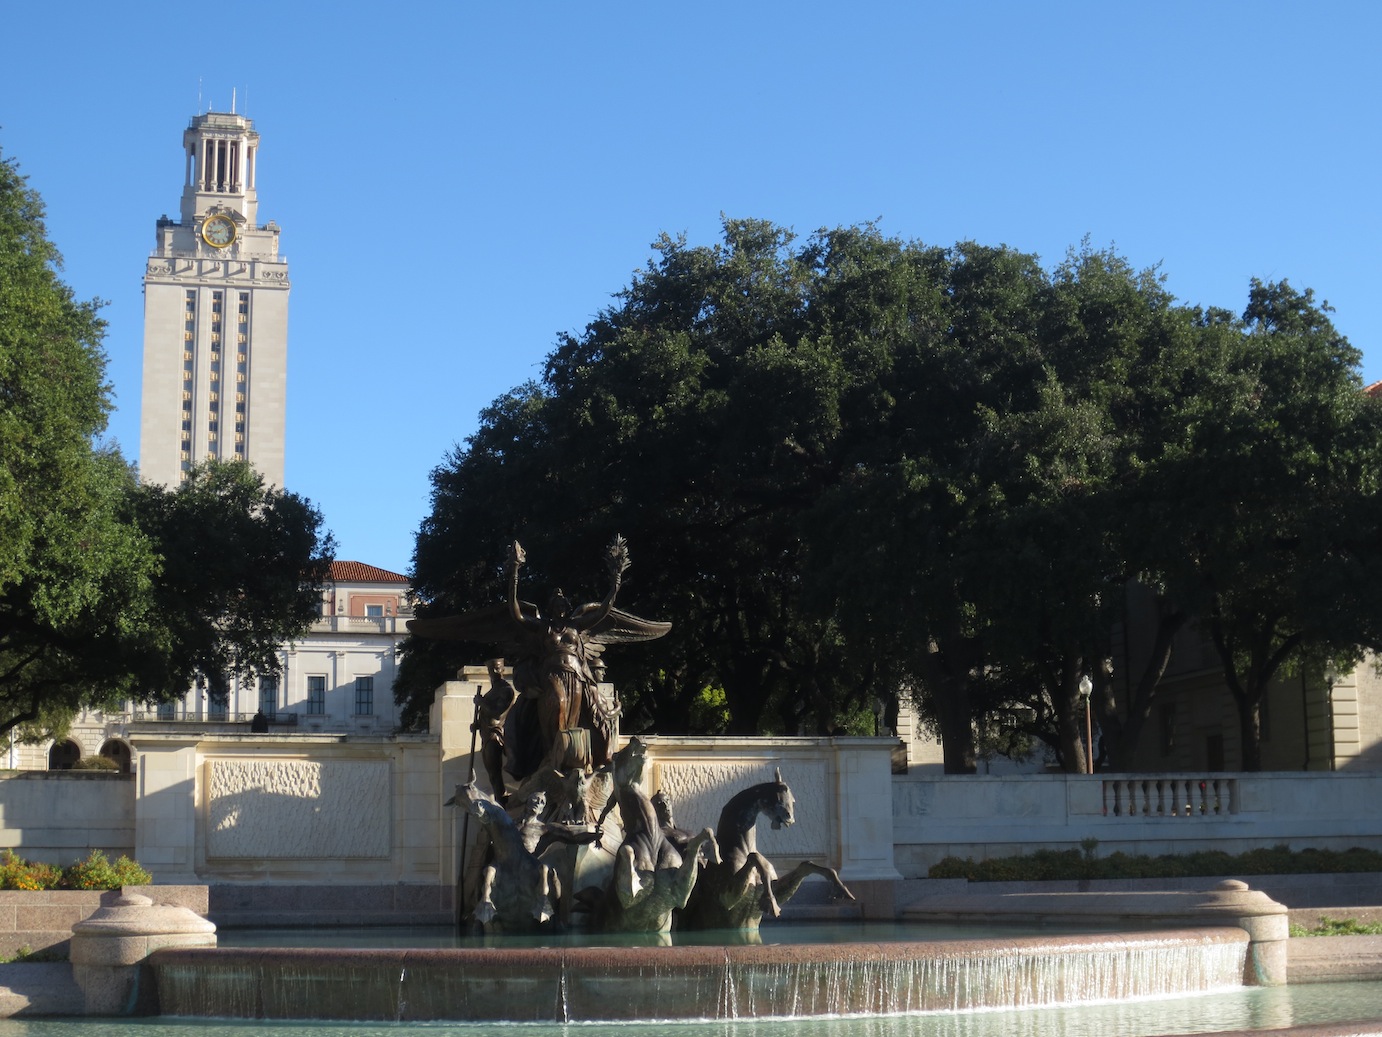 Fountain statue with the UT-Austin Bell Tower in the background.